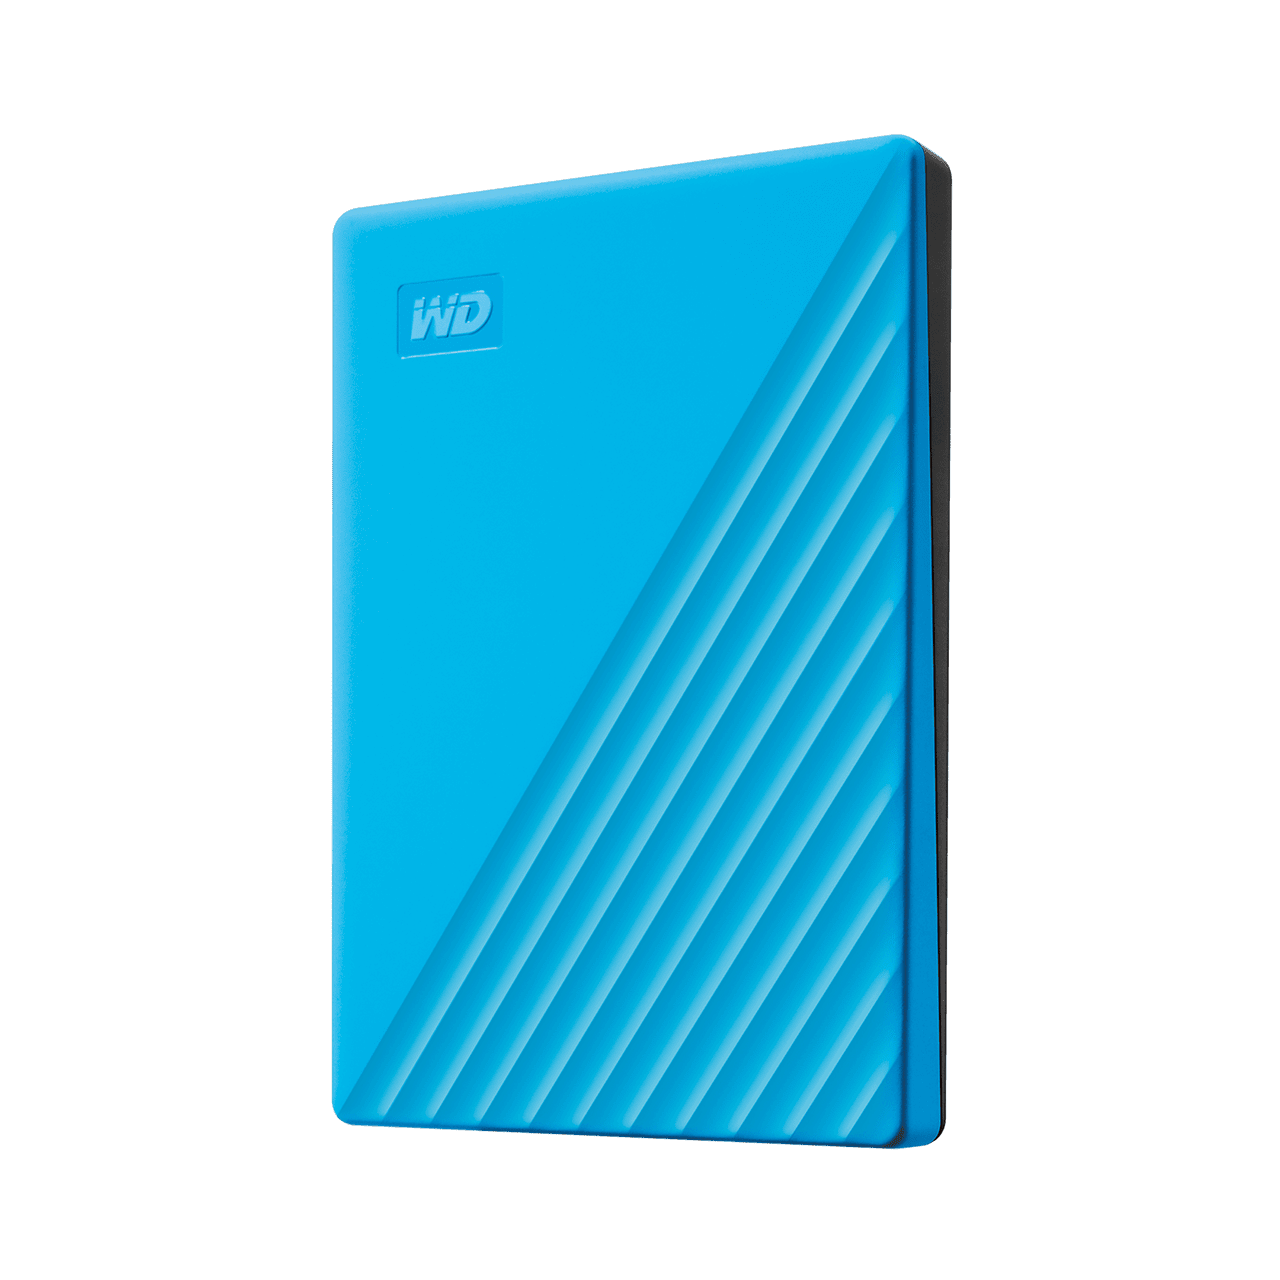 WD Western Digital My Passport 1TB (Blue) Slim Portable External Hard Disk USB 3.0 With WD Backup Software & Password Protection